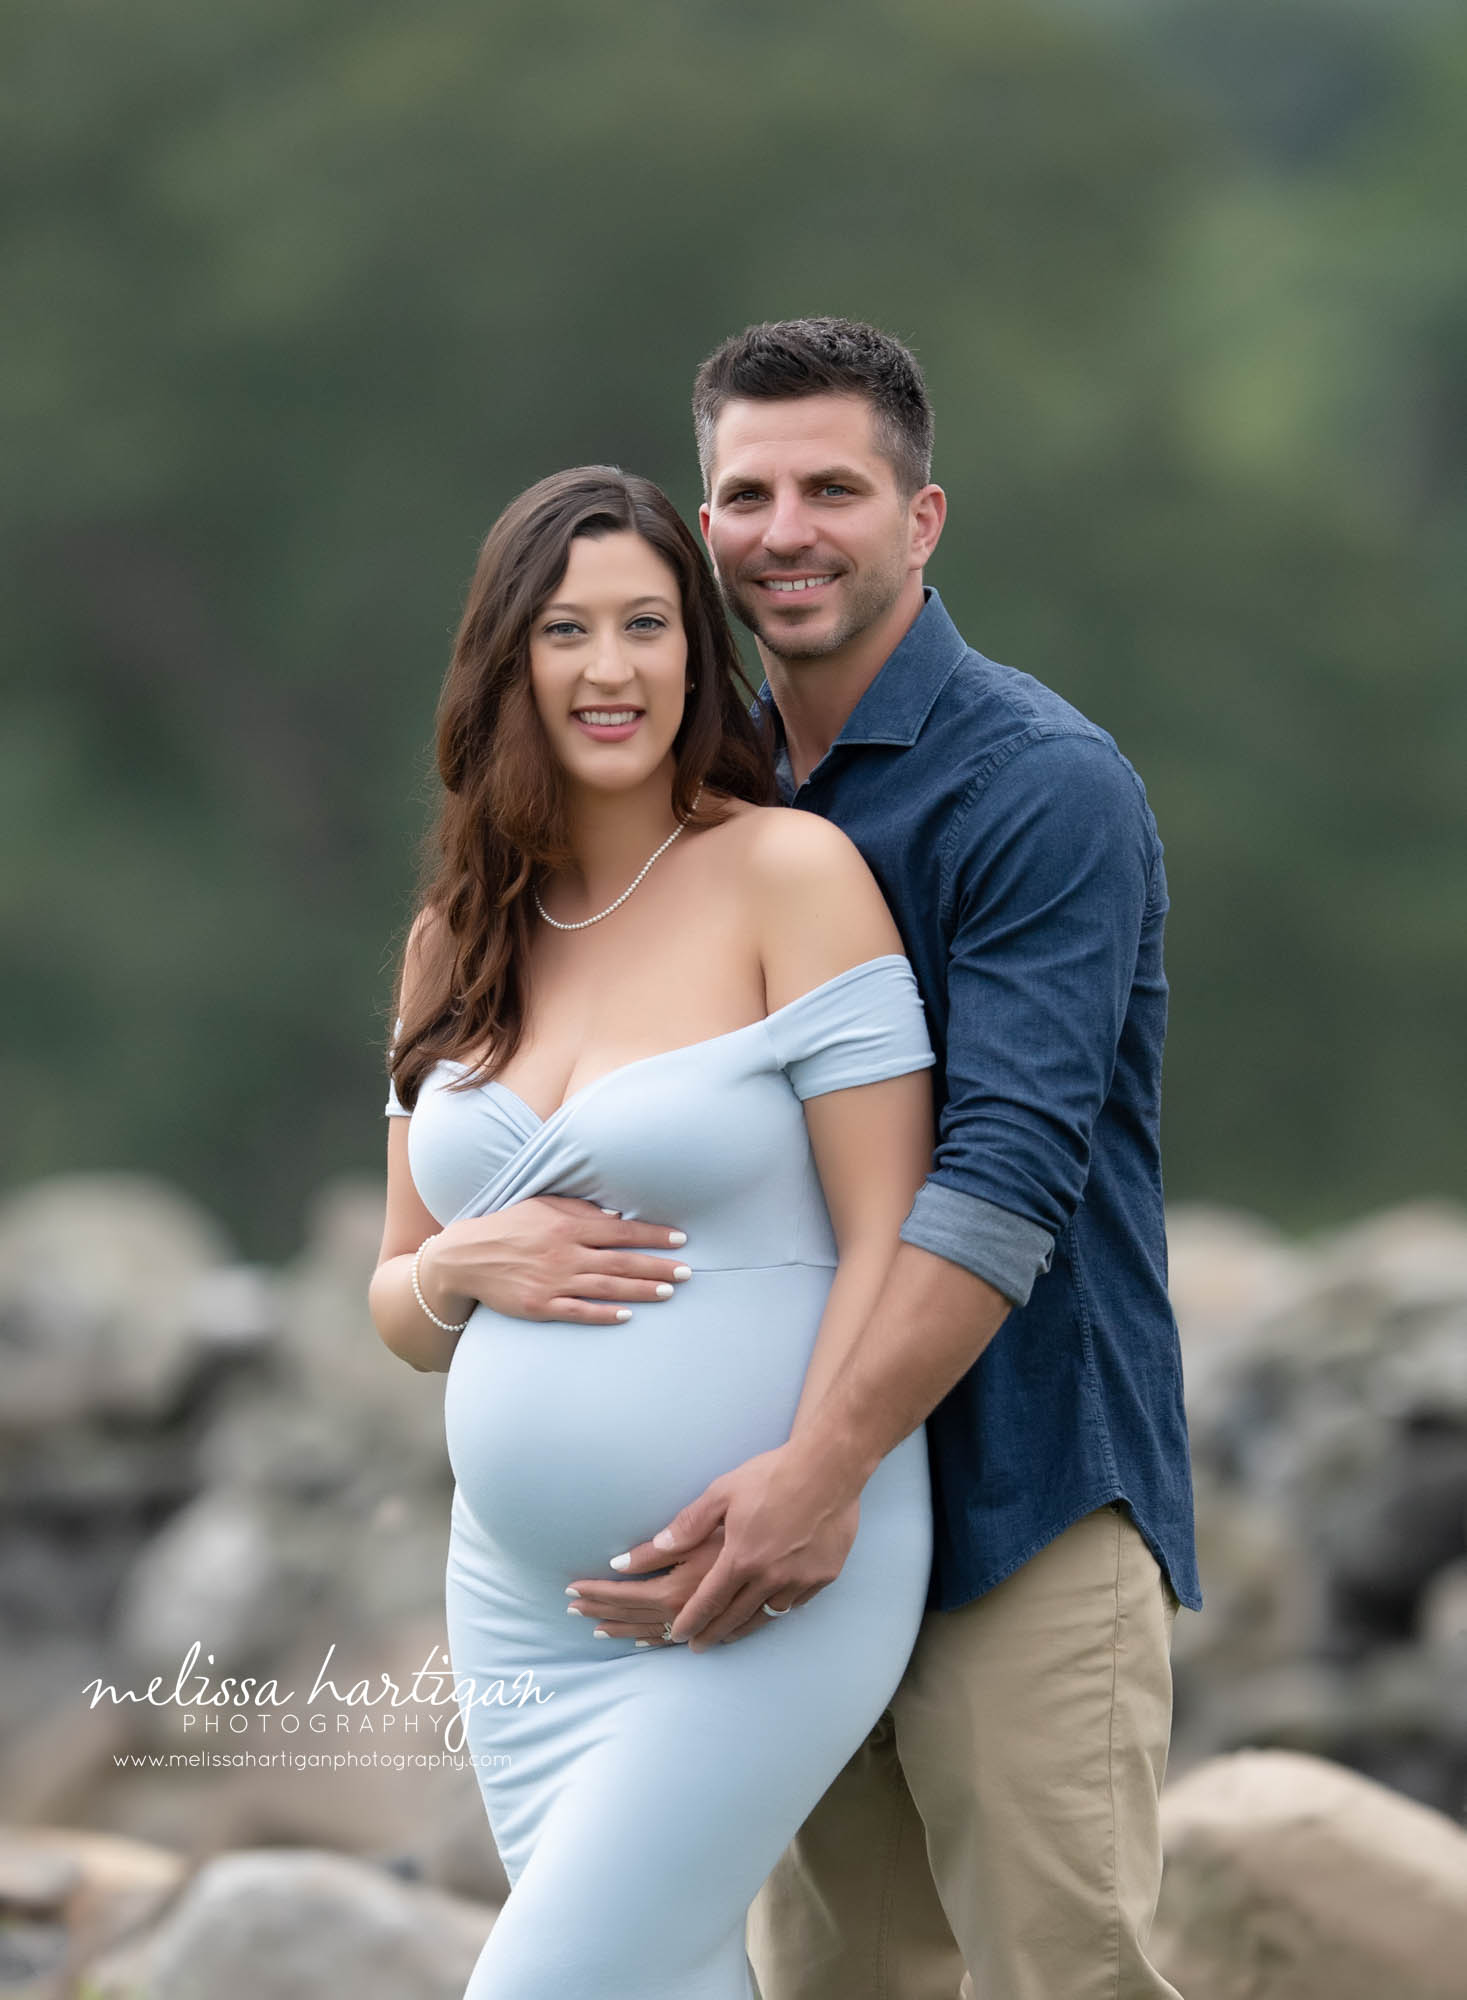 expectant couples pose maternity photography New Hartford CT